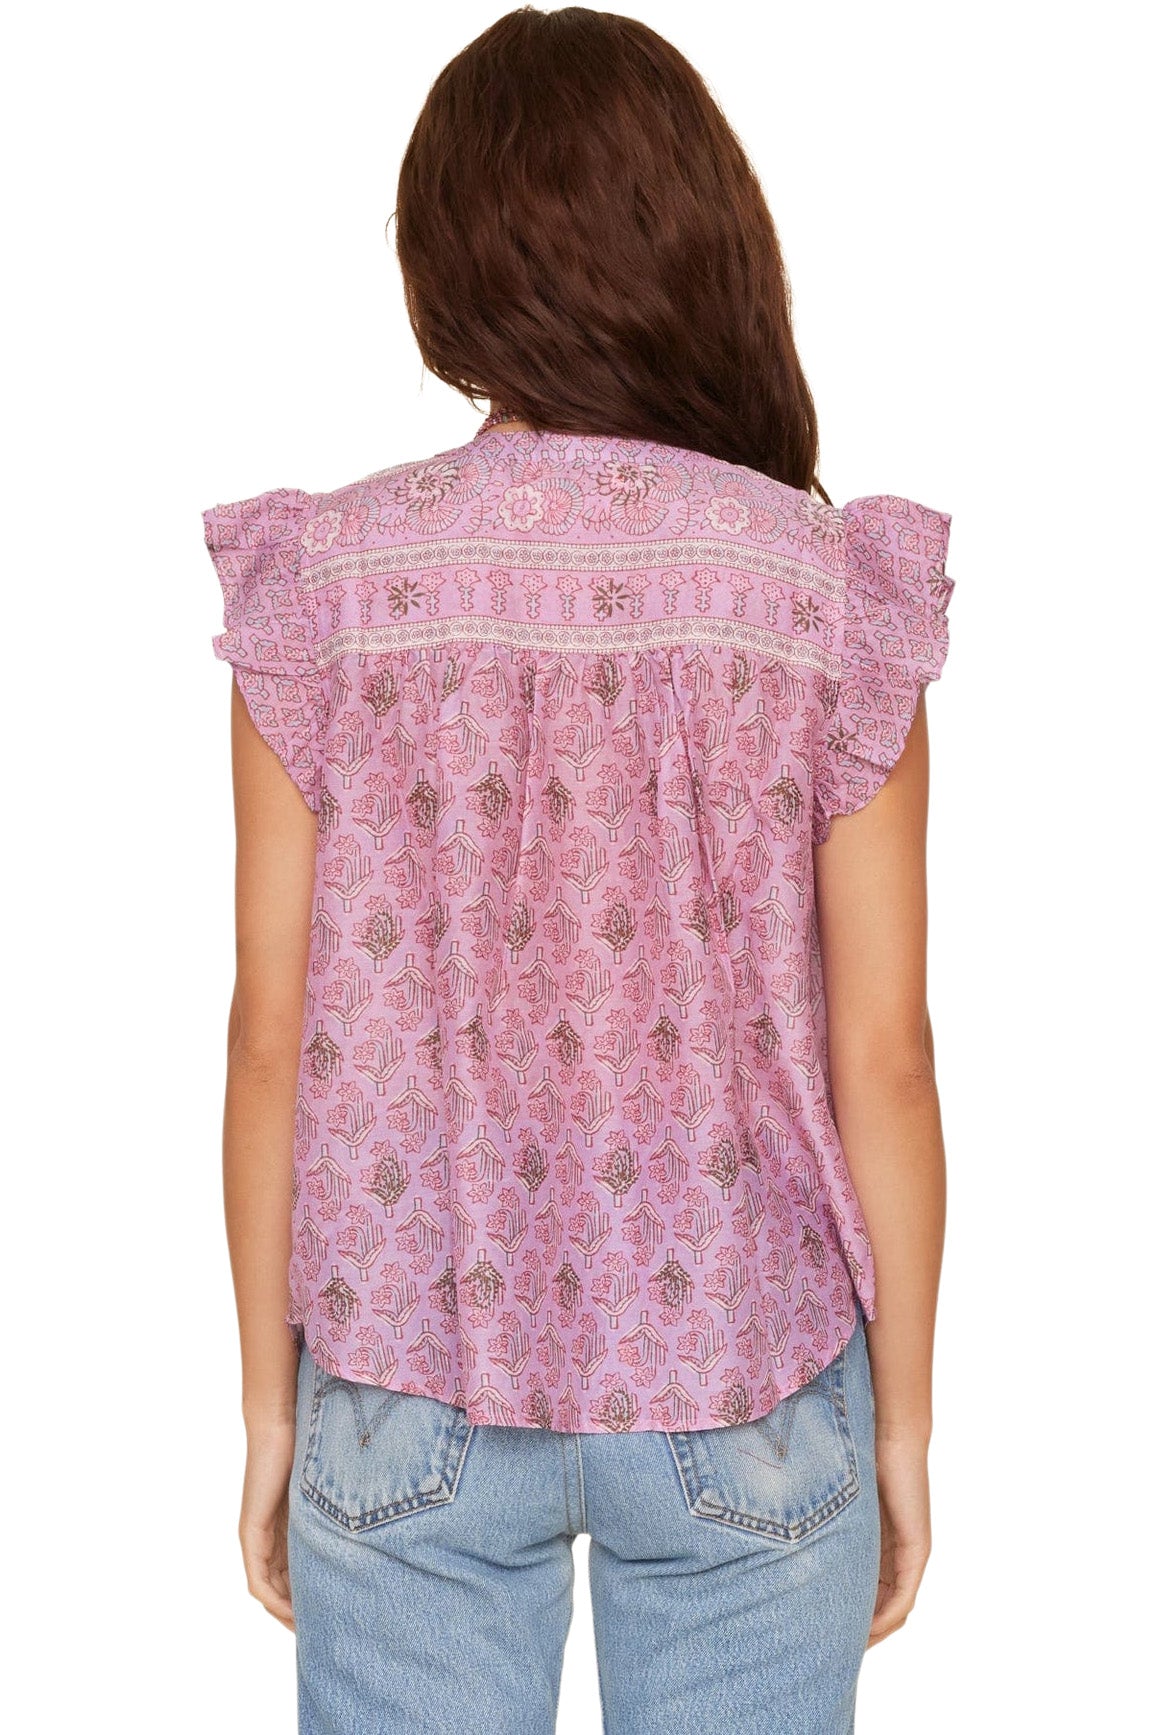 Xirena Bria Top in Pink Posey